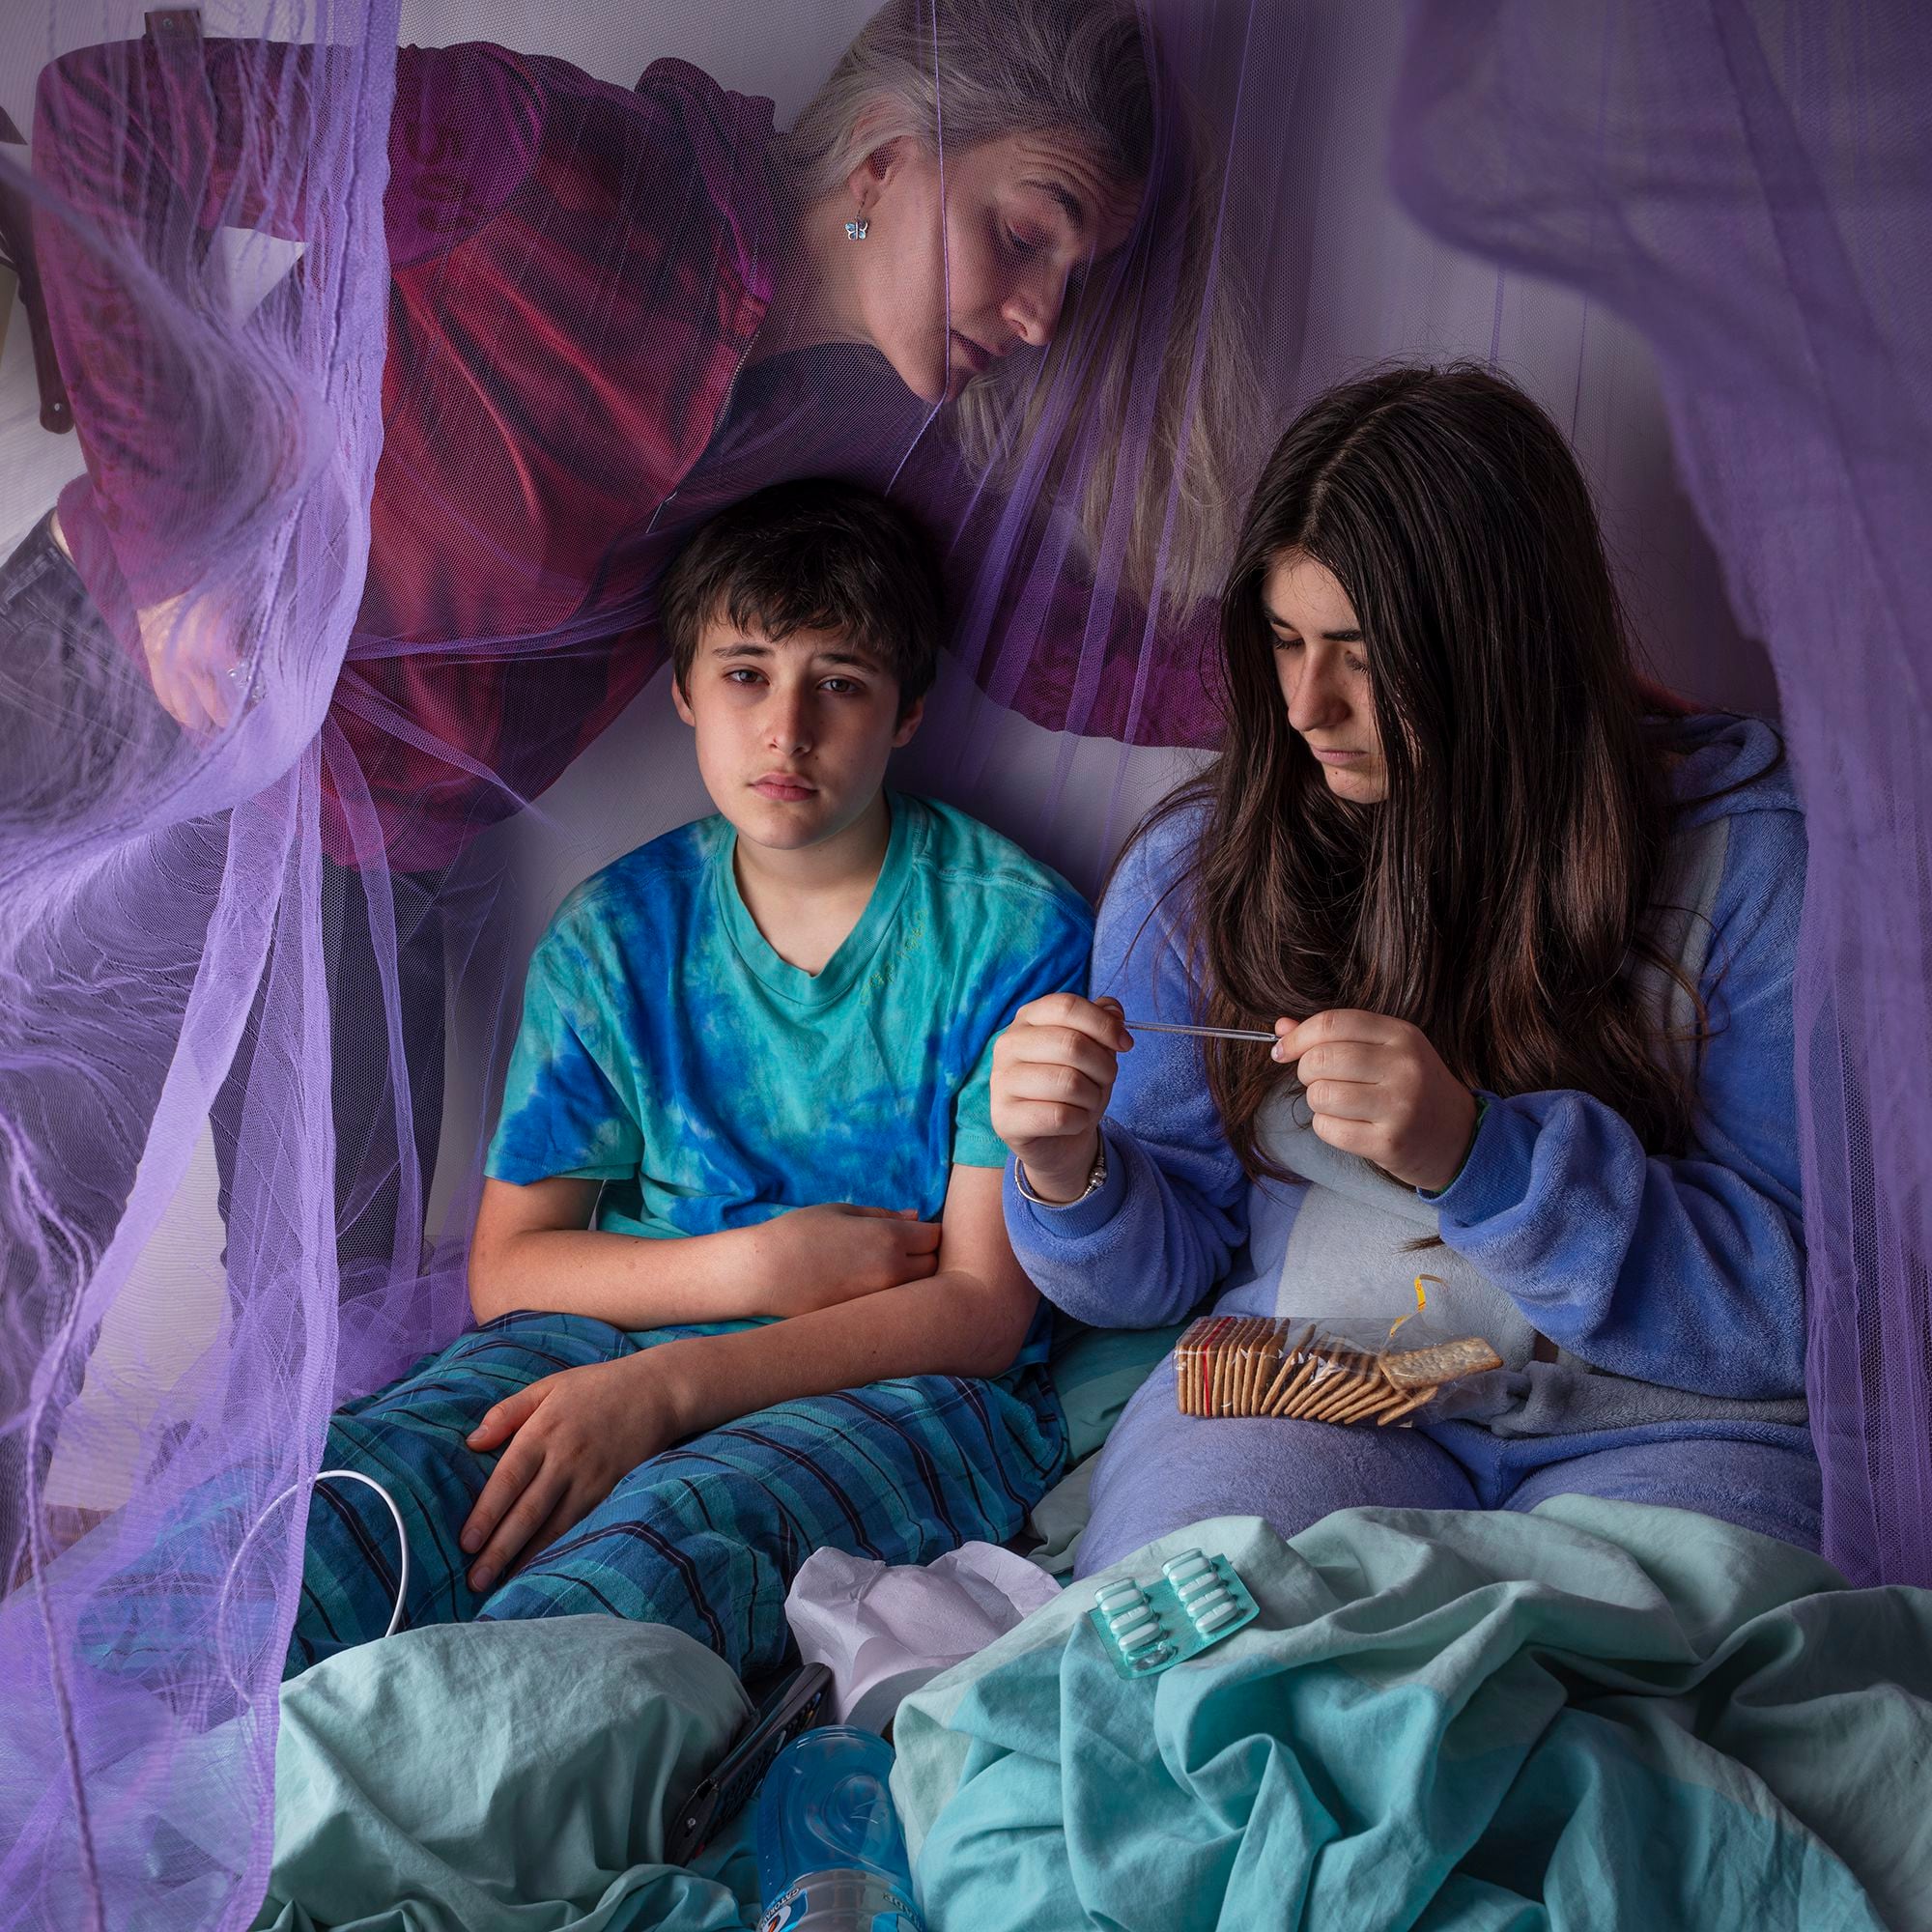 Lara, 15, and Milo, 13, in bed with dengue fever in Buenos Aires, Argentina, with their mother Verónica.  Only 1 in 5 people infected with dengue have symptoms.  Symptoms may include: high fever, severe headache, pain behind the eyes, muscle and joint pain, nausea, vomiting and skin rashes.  People infected a second time have a higher risk of severe dengue fever.